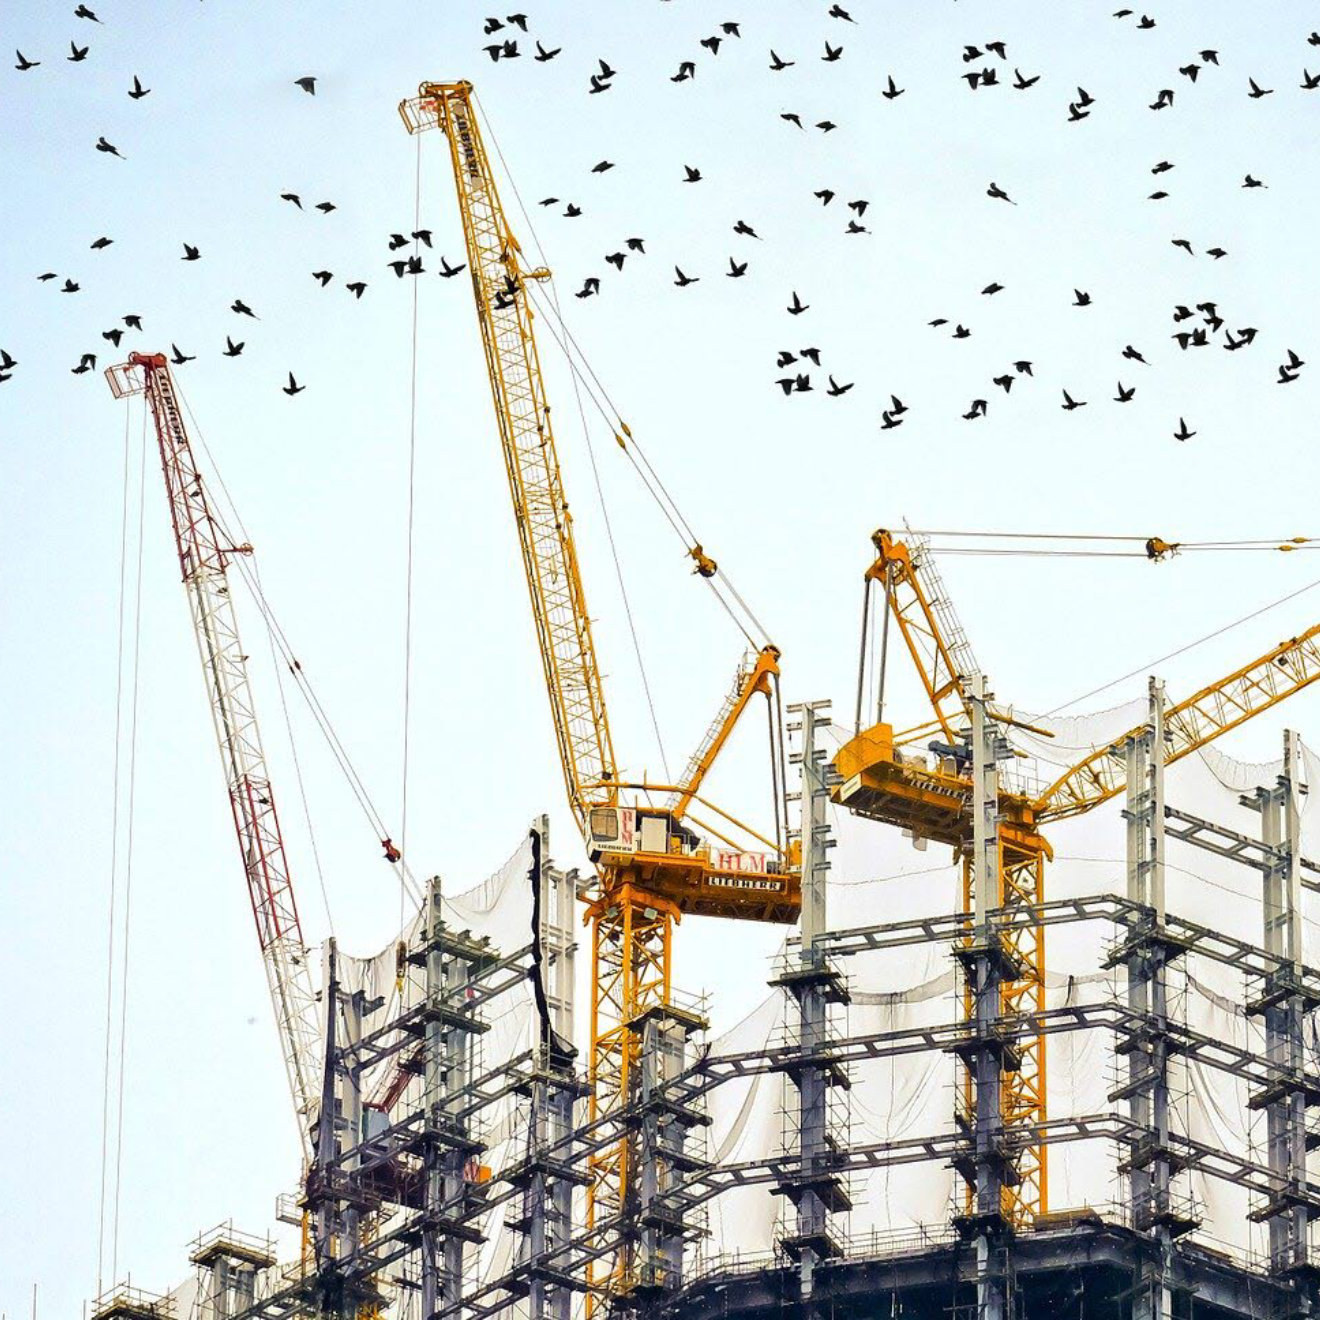 Building with scaffolding and birds flying over head